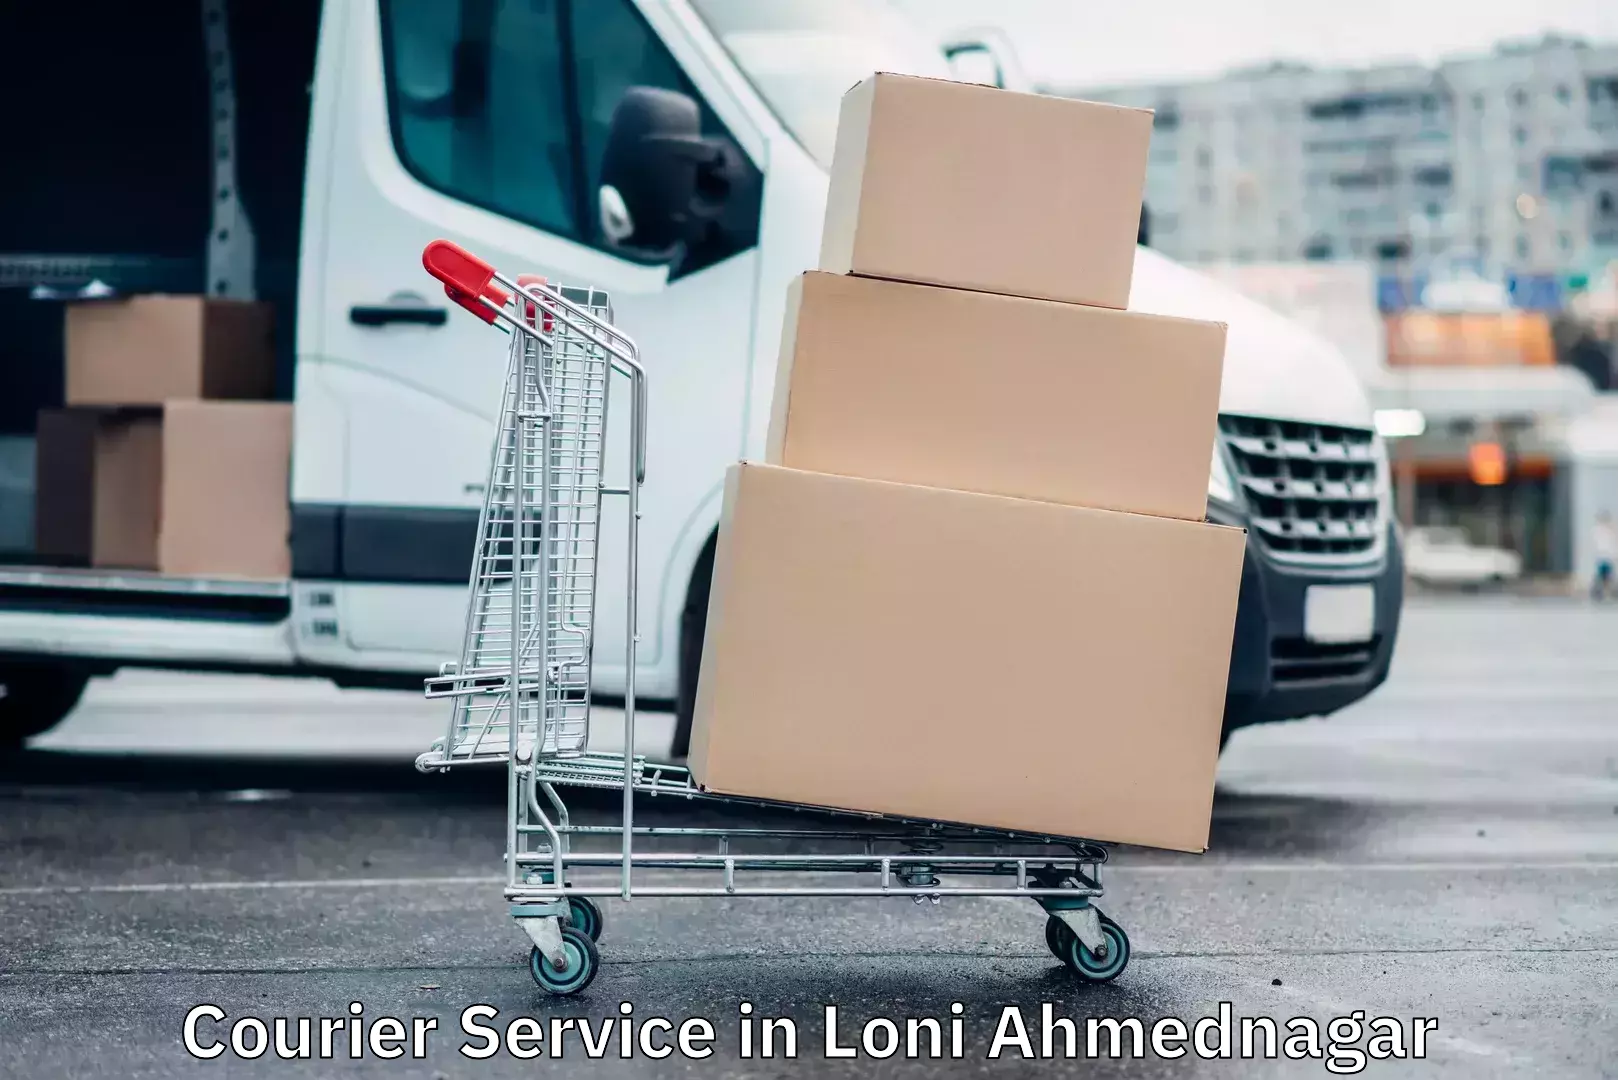 Multi-service courier options in Loni Ahmednagar